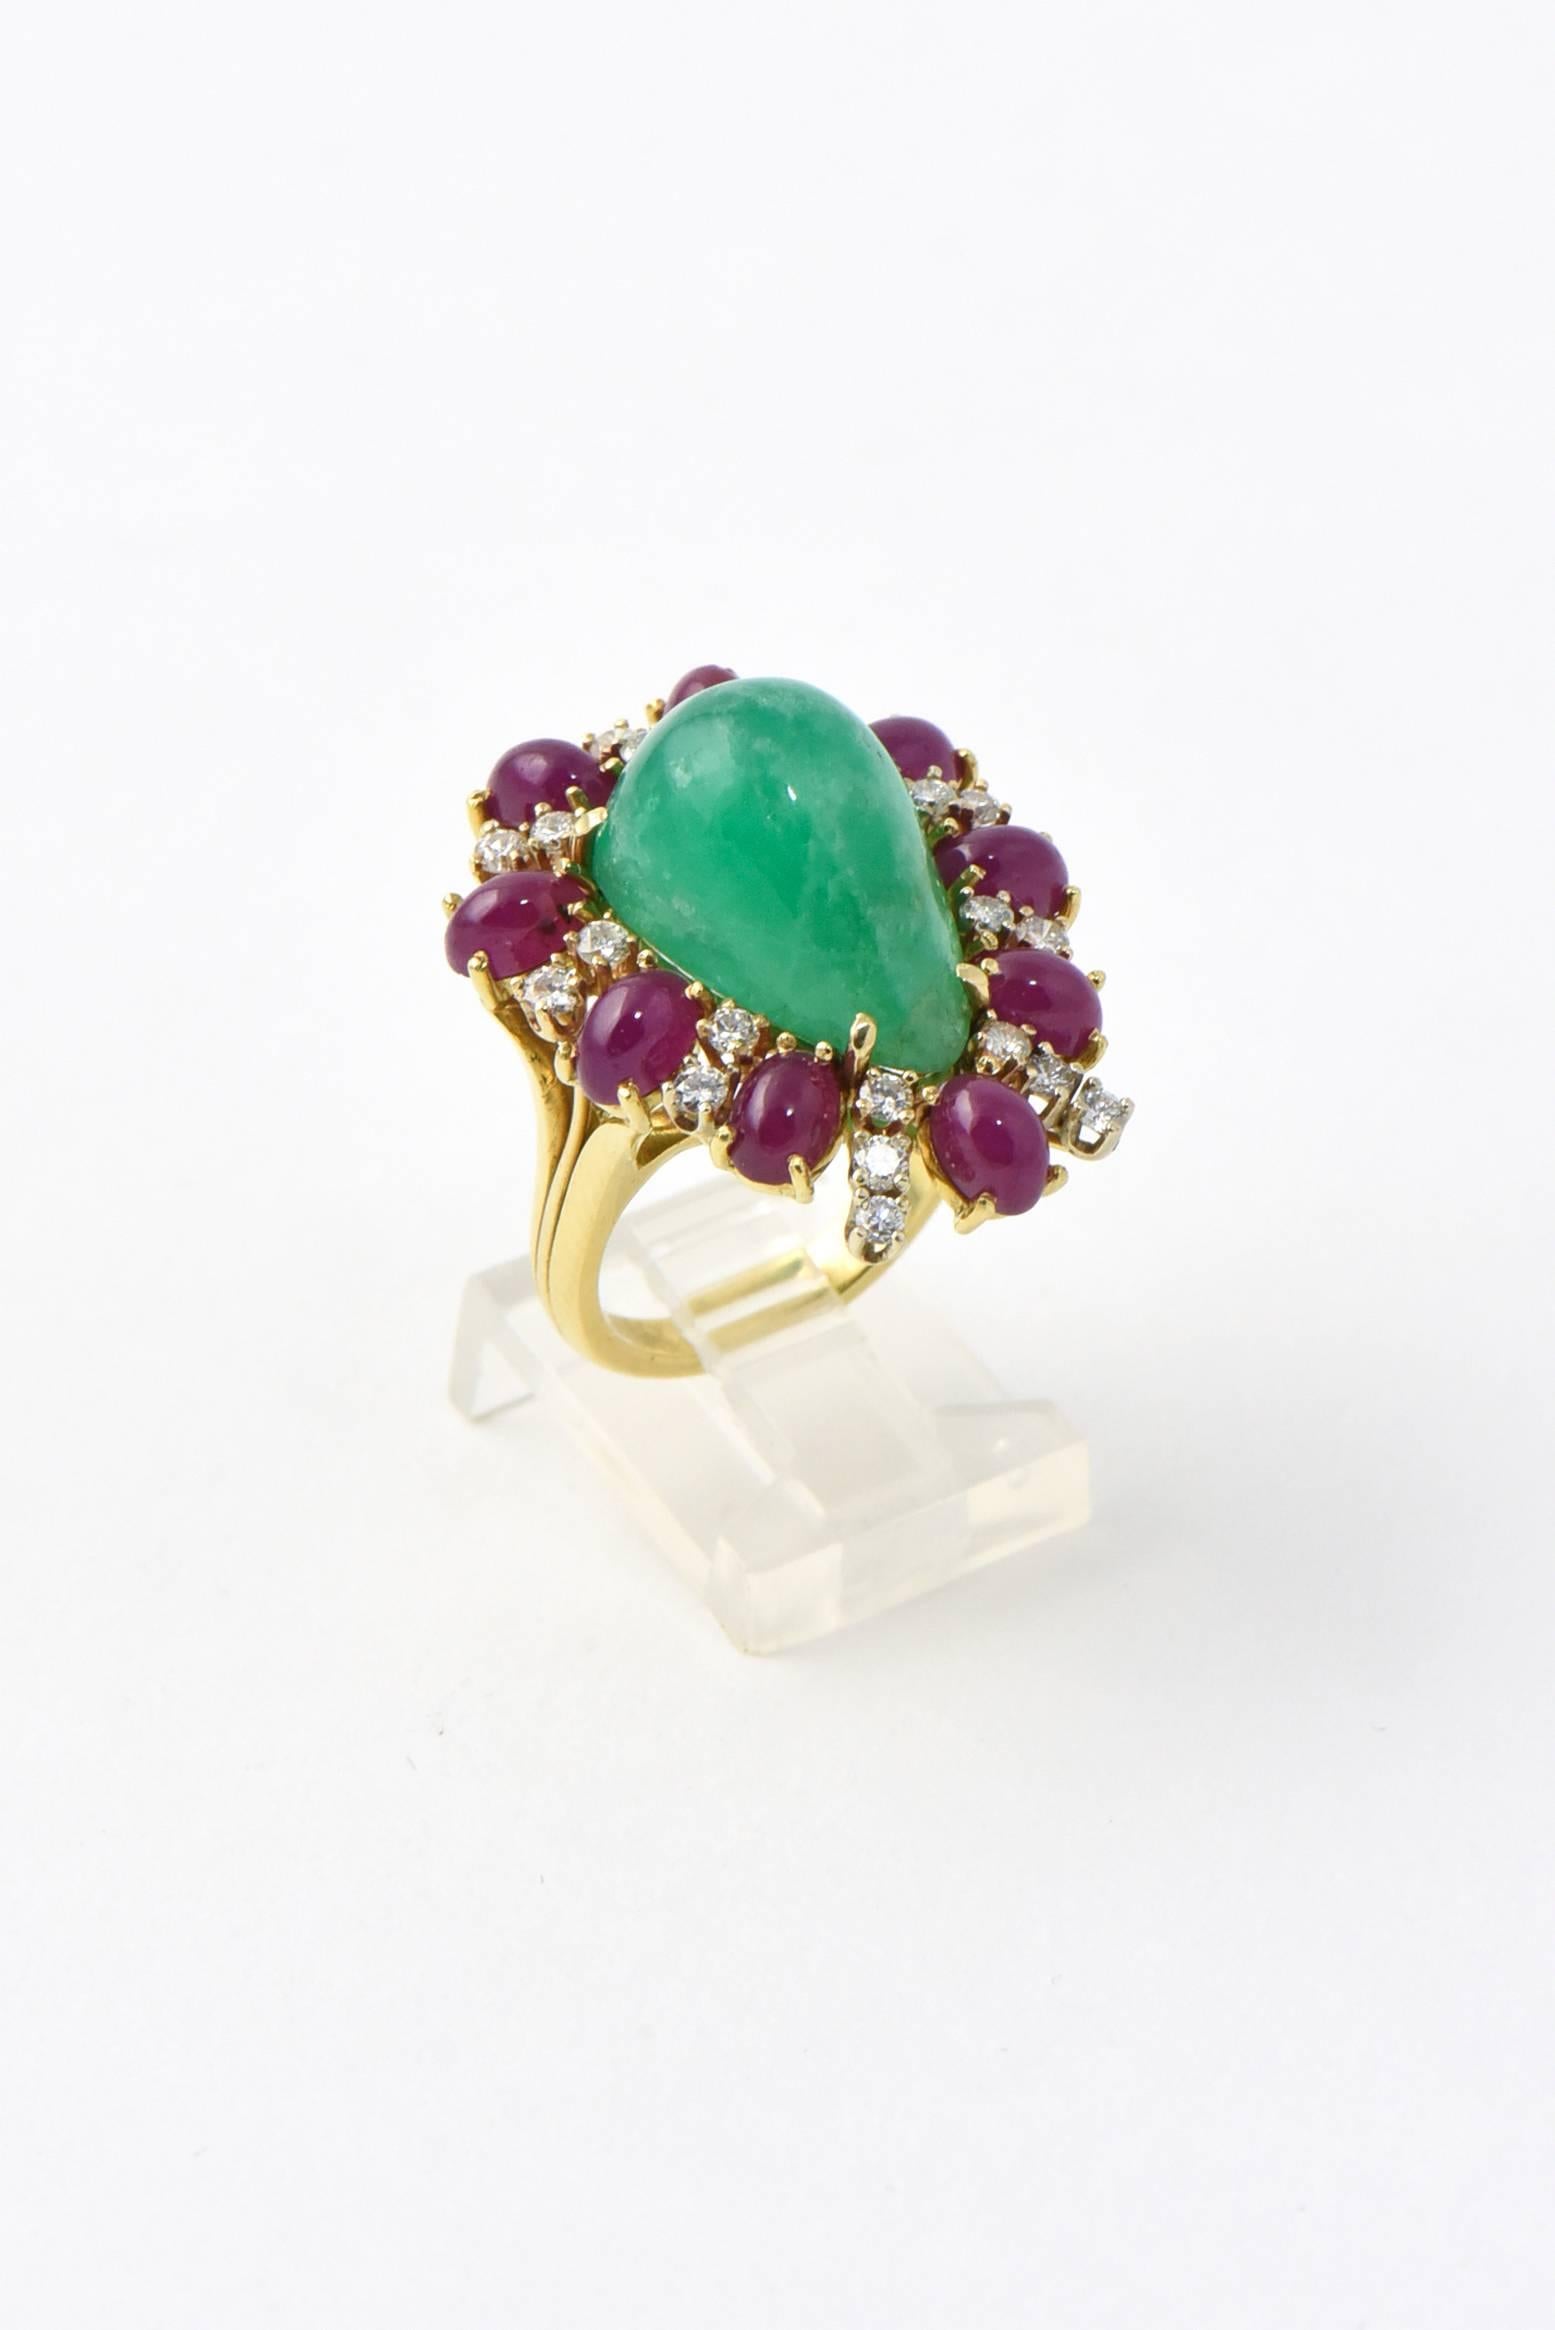 Impressive custom made ring featuring a large cabochon pear shaped emerald surrounded by prong set cabochon rubies and diamonds.  This stunning statement ring is made of 18k yellow gold.

US size 7 - it can be sized.

This ring as well as a